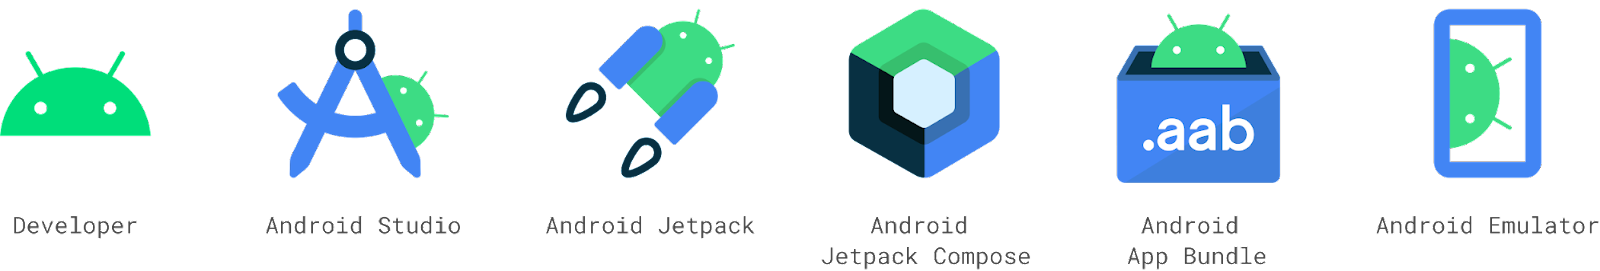 image of the Android Developer log family including the new Android Studio and Android Emulator logos